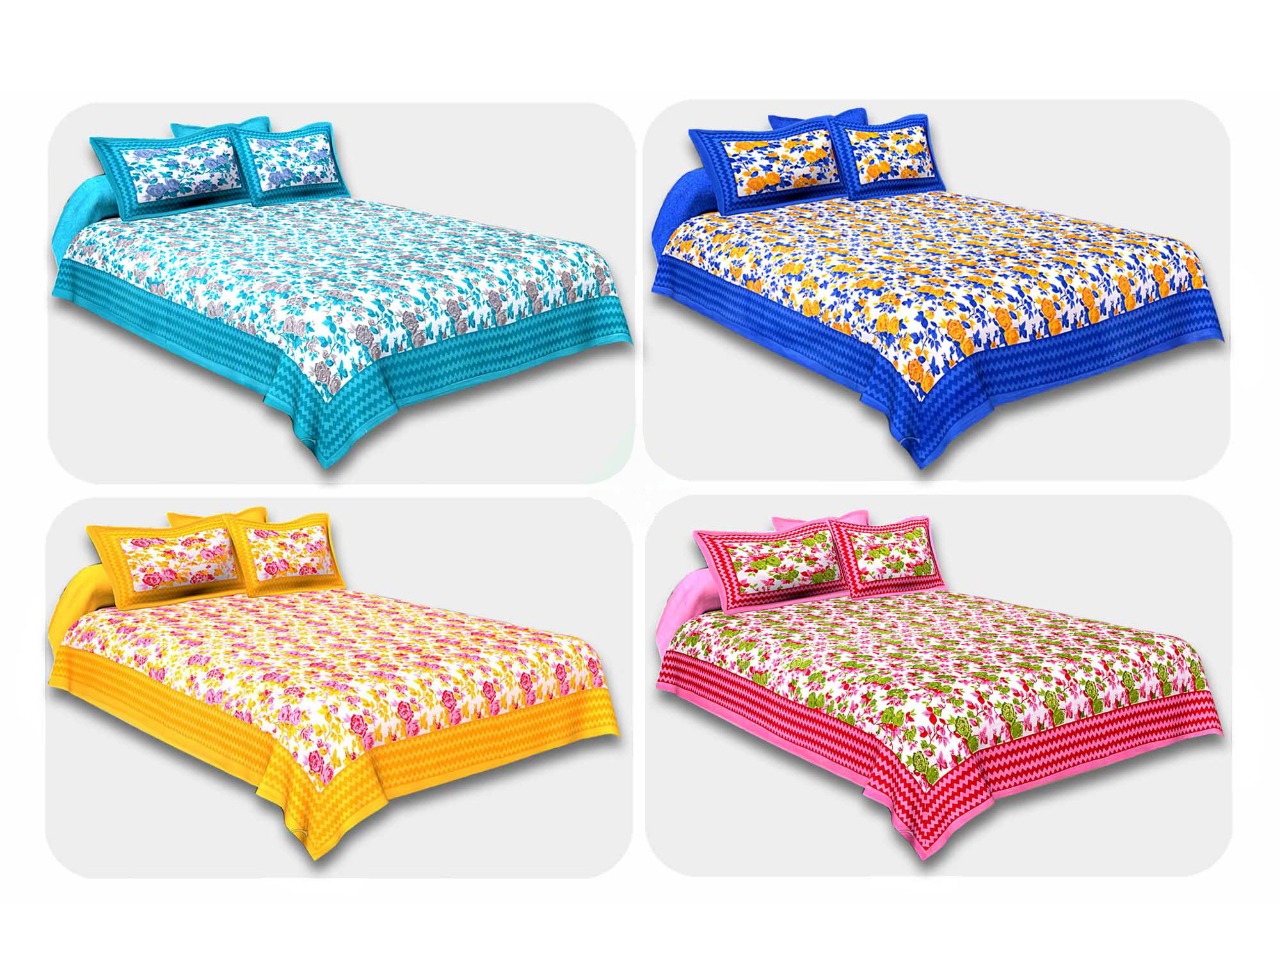 COMBO116 Beautiful Multicolor 4 Bedsheet + 8 Pillow Cover